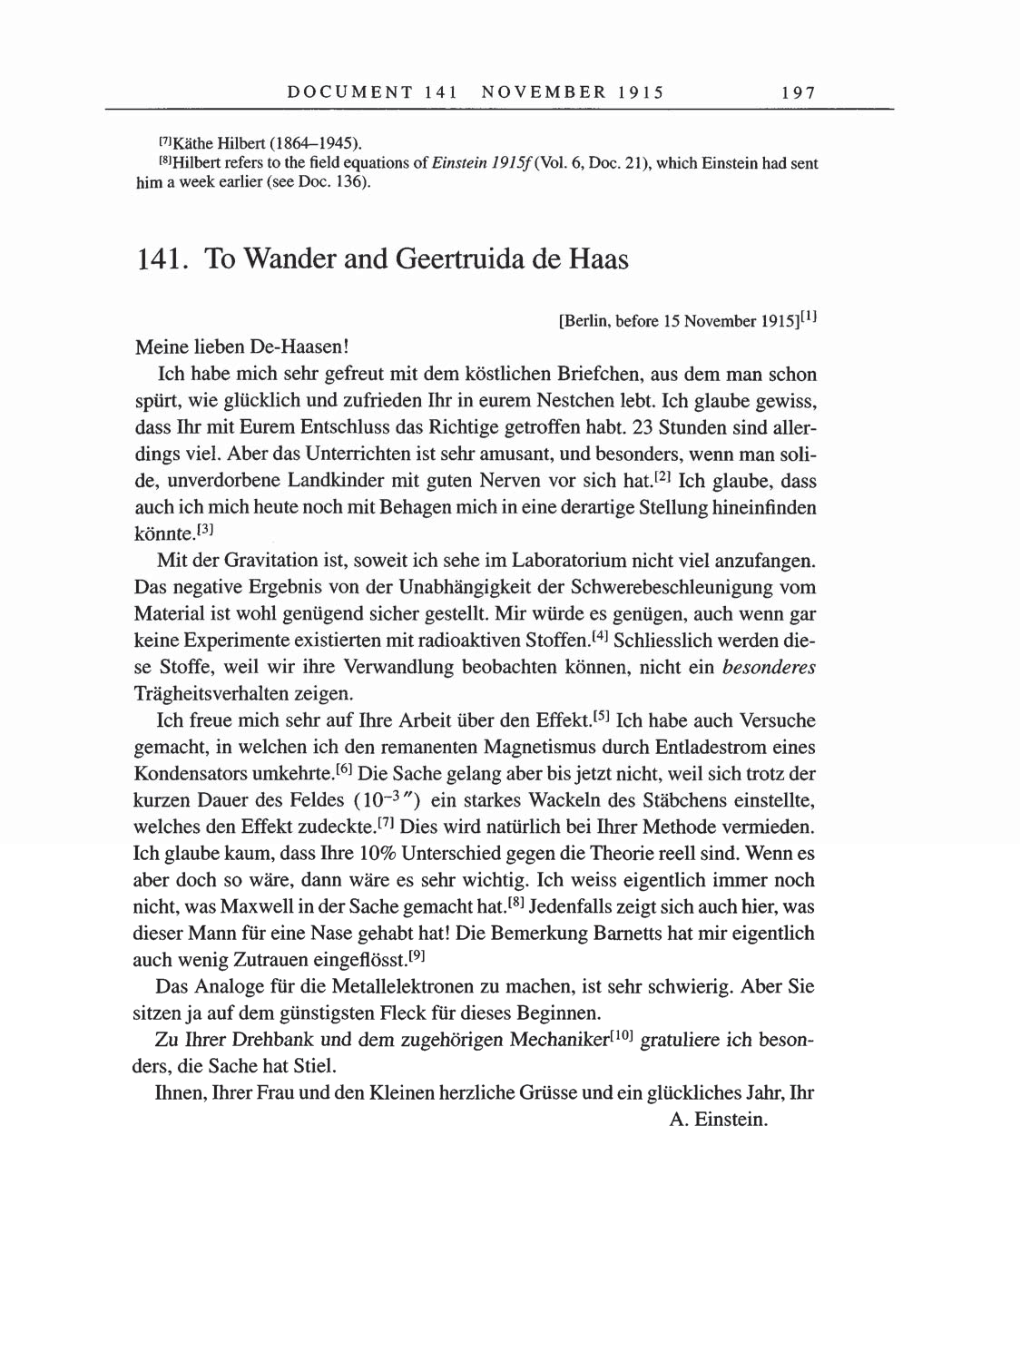 Volume 8, Part A: The Berlin Years: Correspondence 1914-1917 page 197